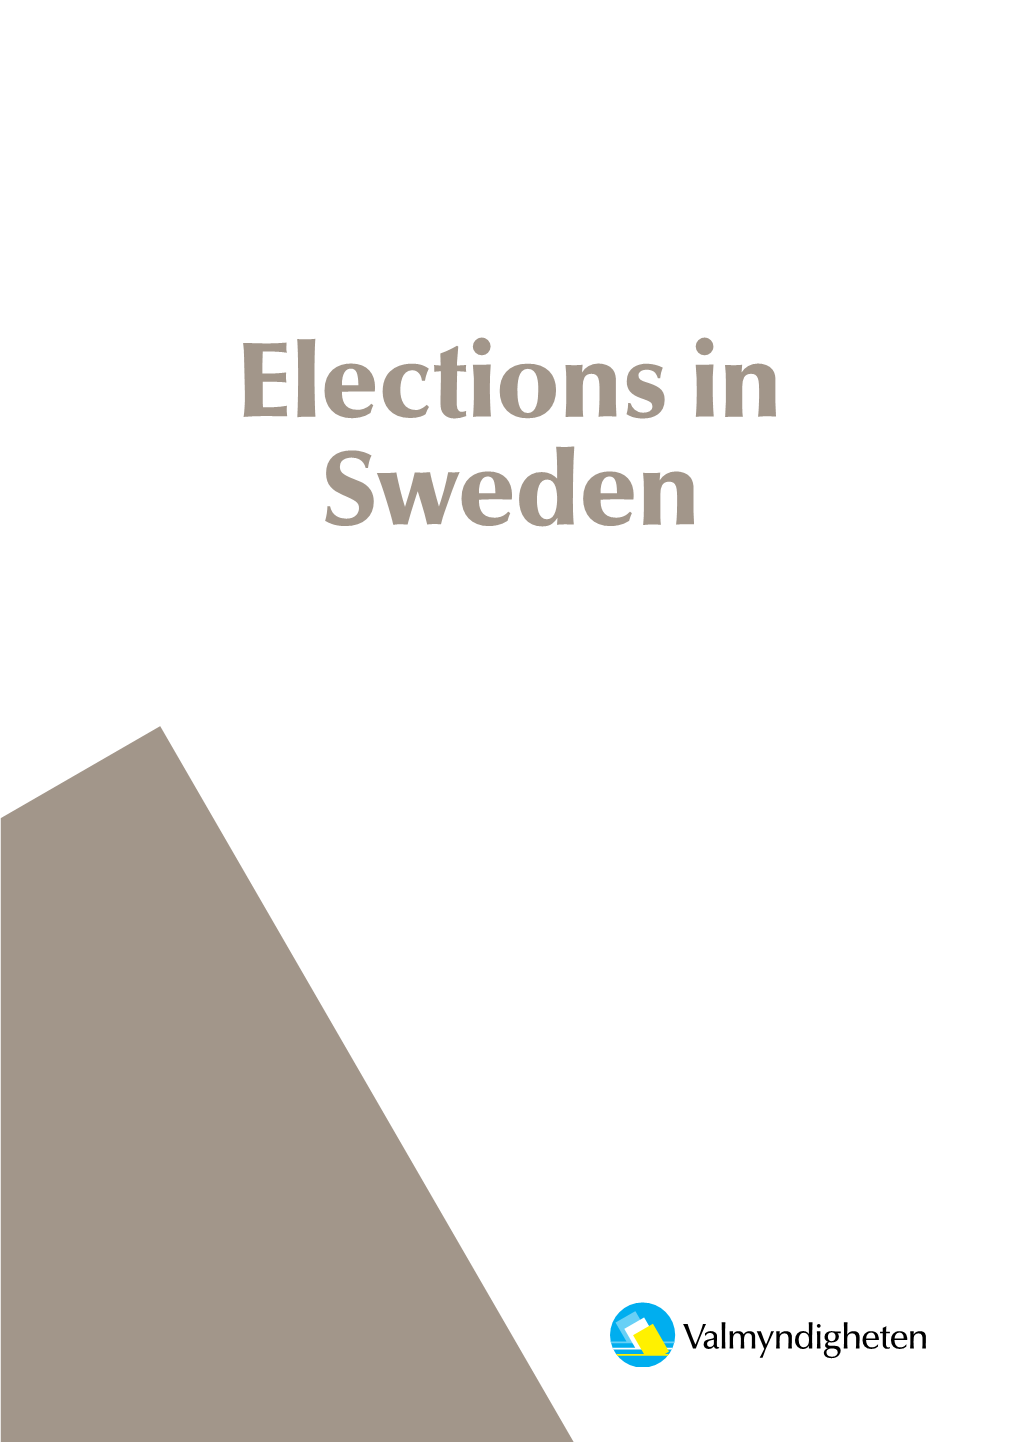 Elections in Sweden